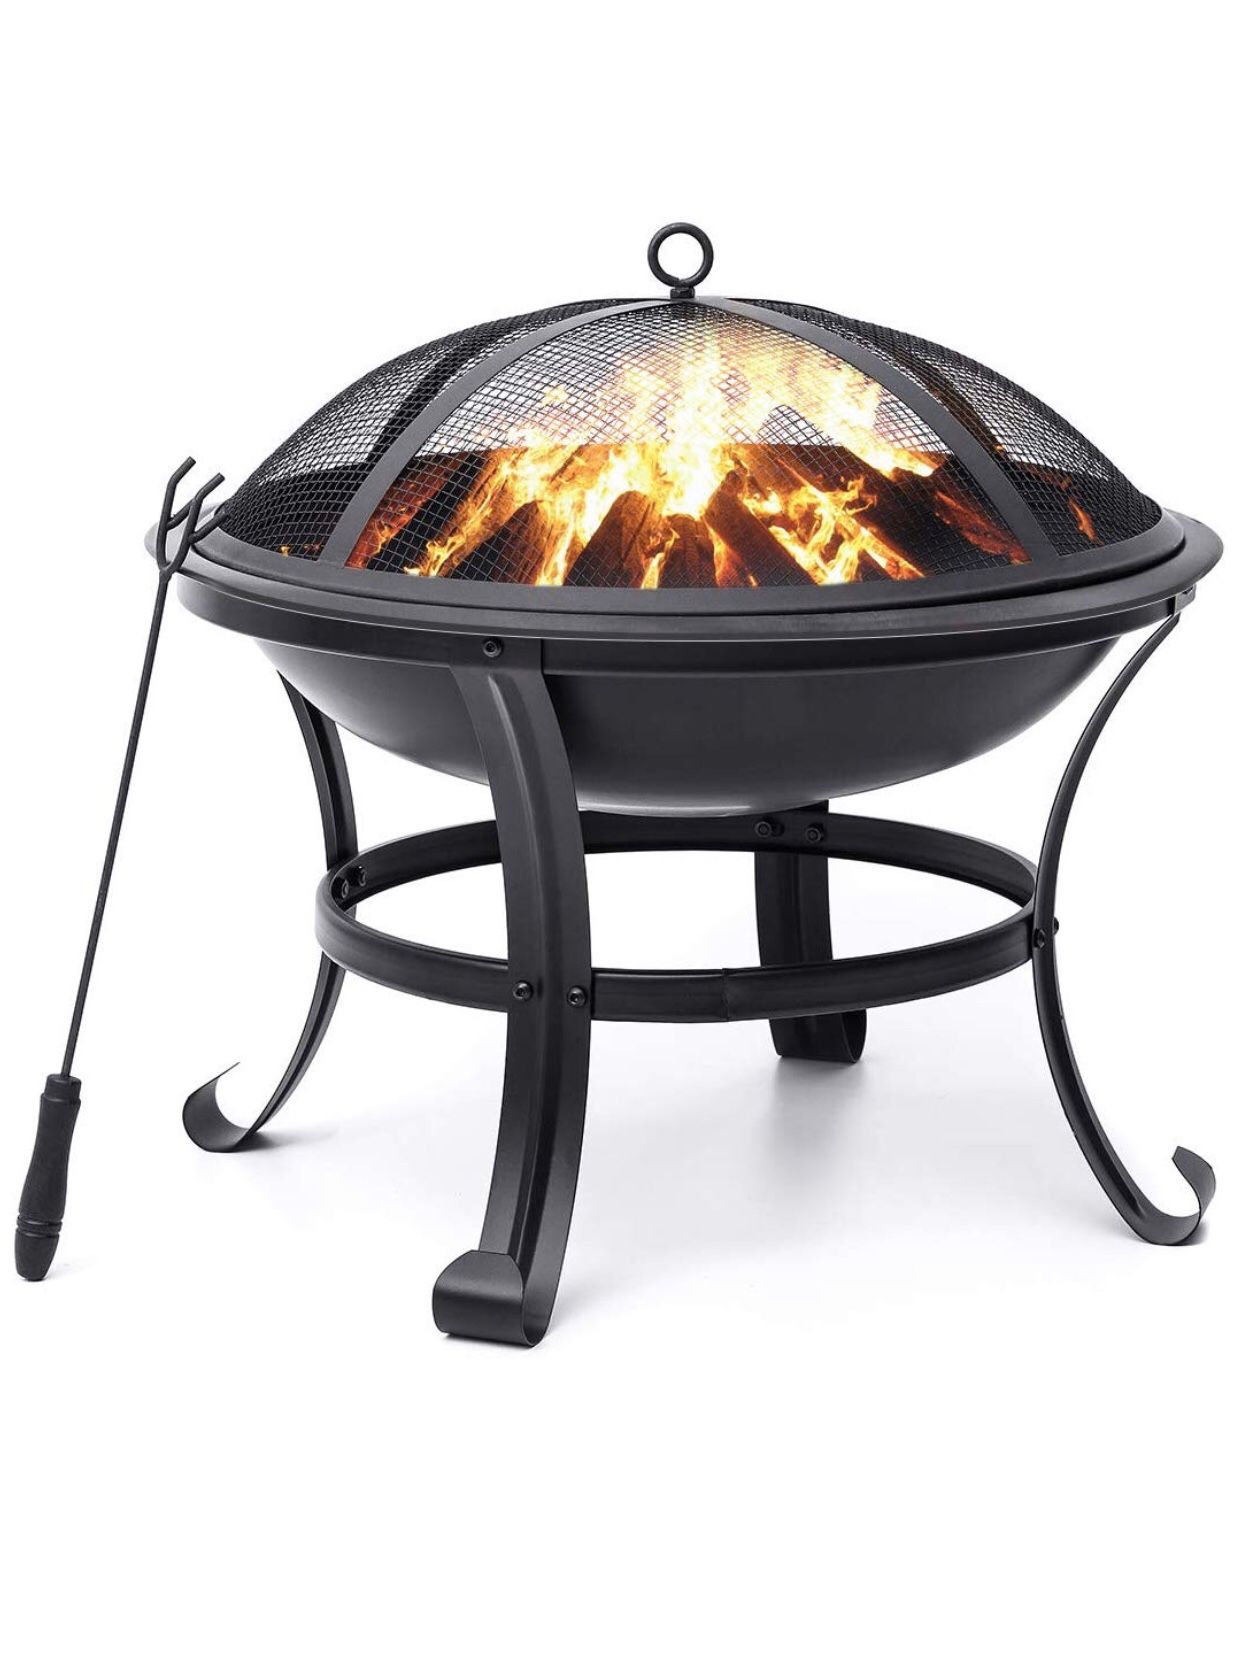 New Outdoor Fire Pit 22'' Steel Grill Bowl with Mesh Spark Screen Cover. Bonfire, BBQ, Backyard, Patio.